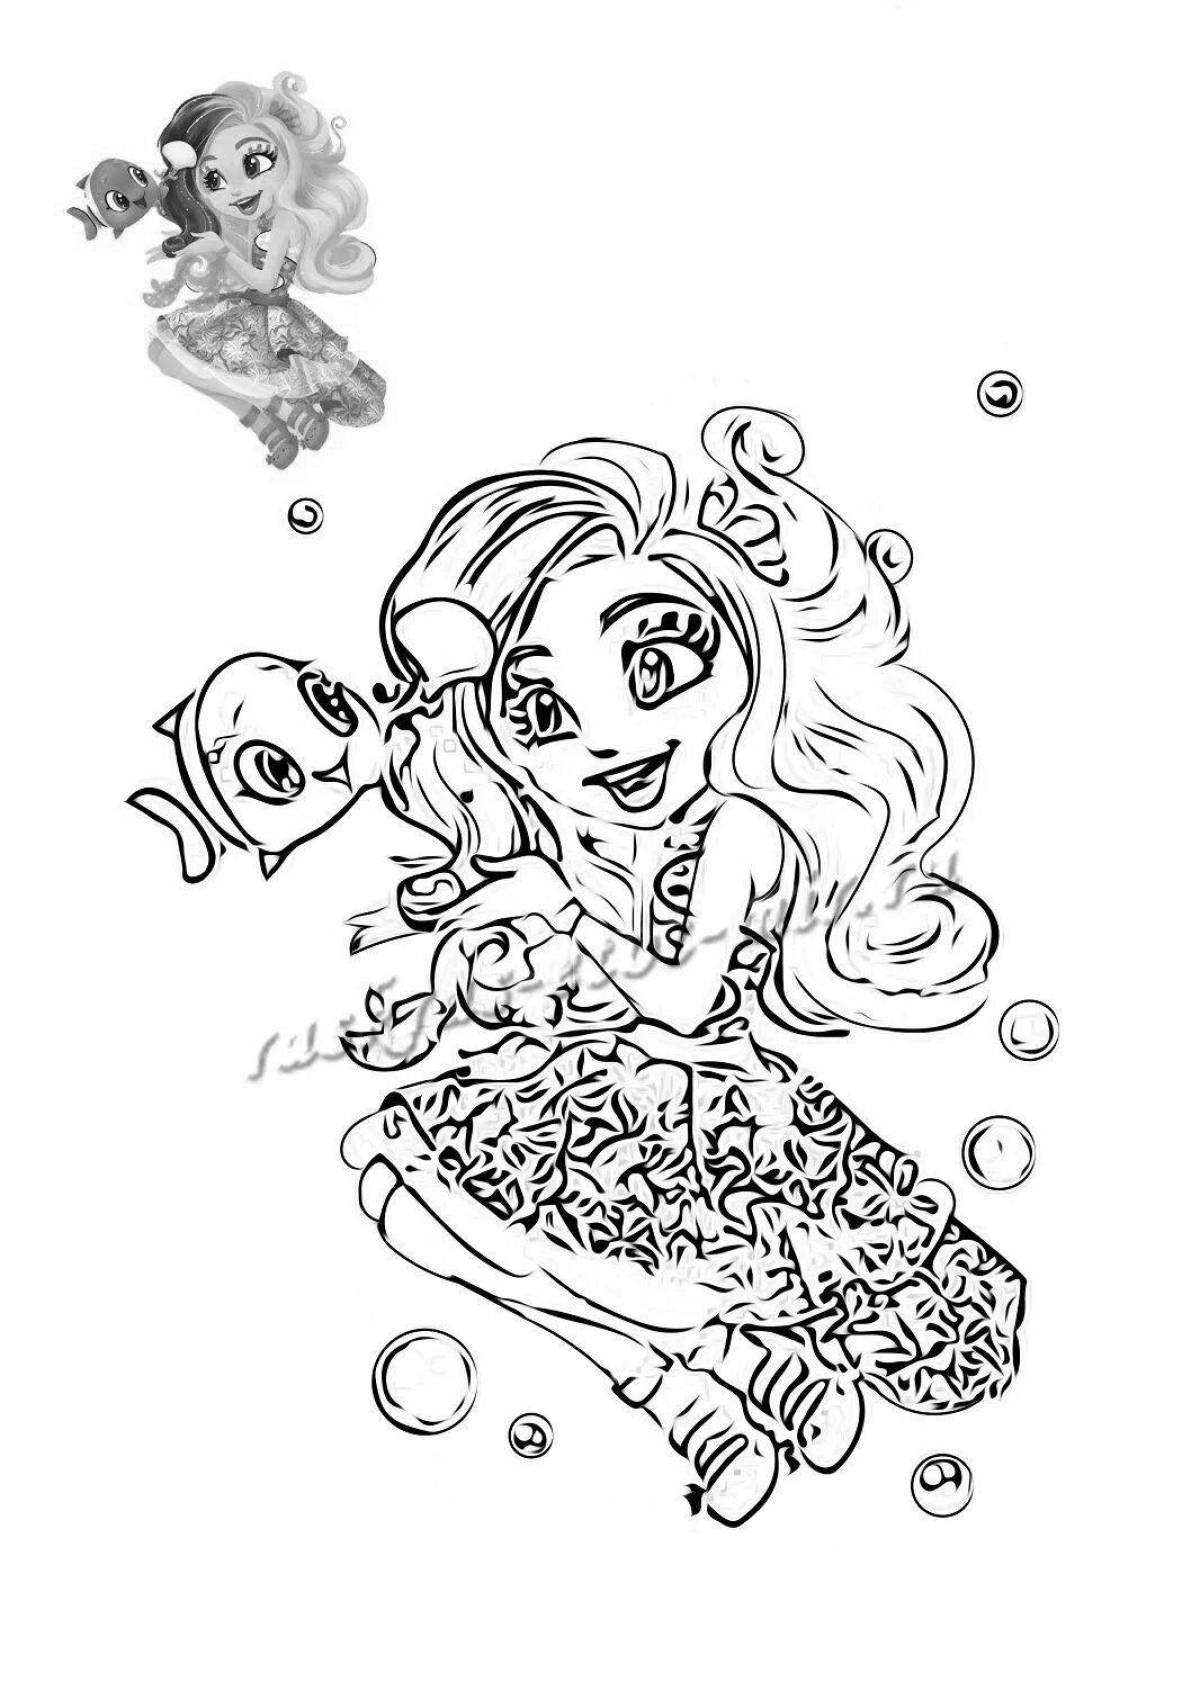 Animated mermaid coloring pages